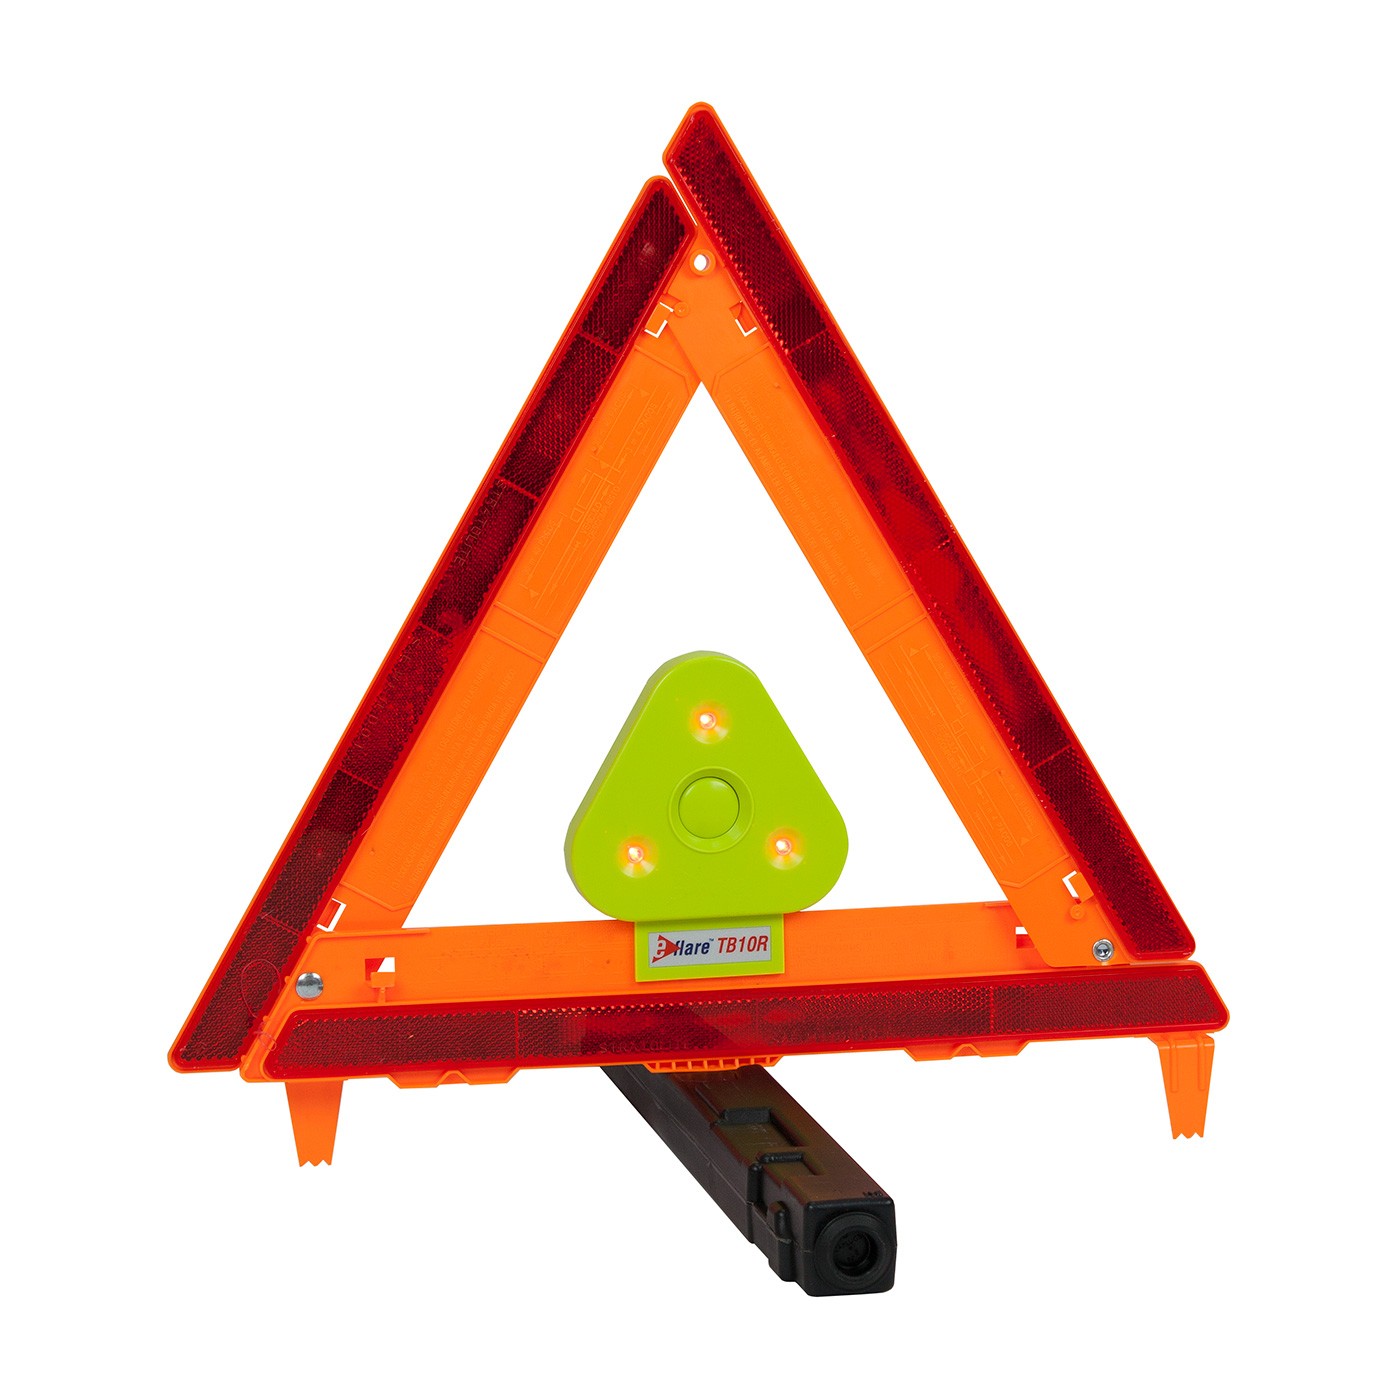 Eflare™ Safety & Emergency Beacon for Safety Triangles - Flashing Red  (#939-TB10-R)